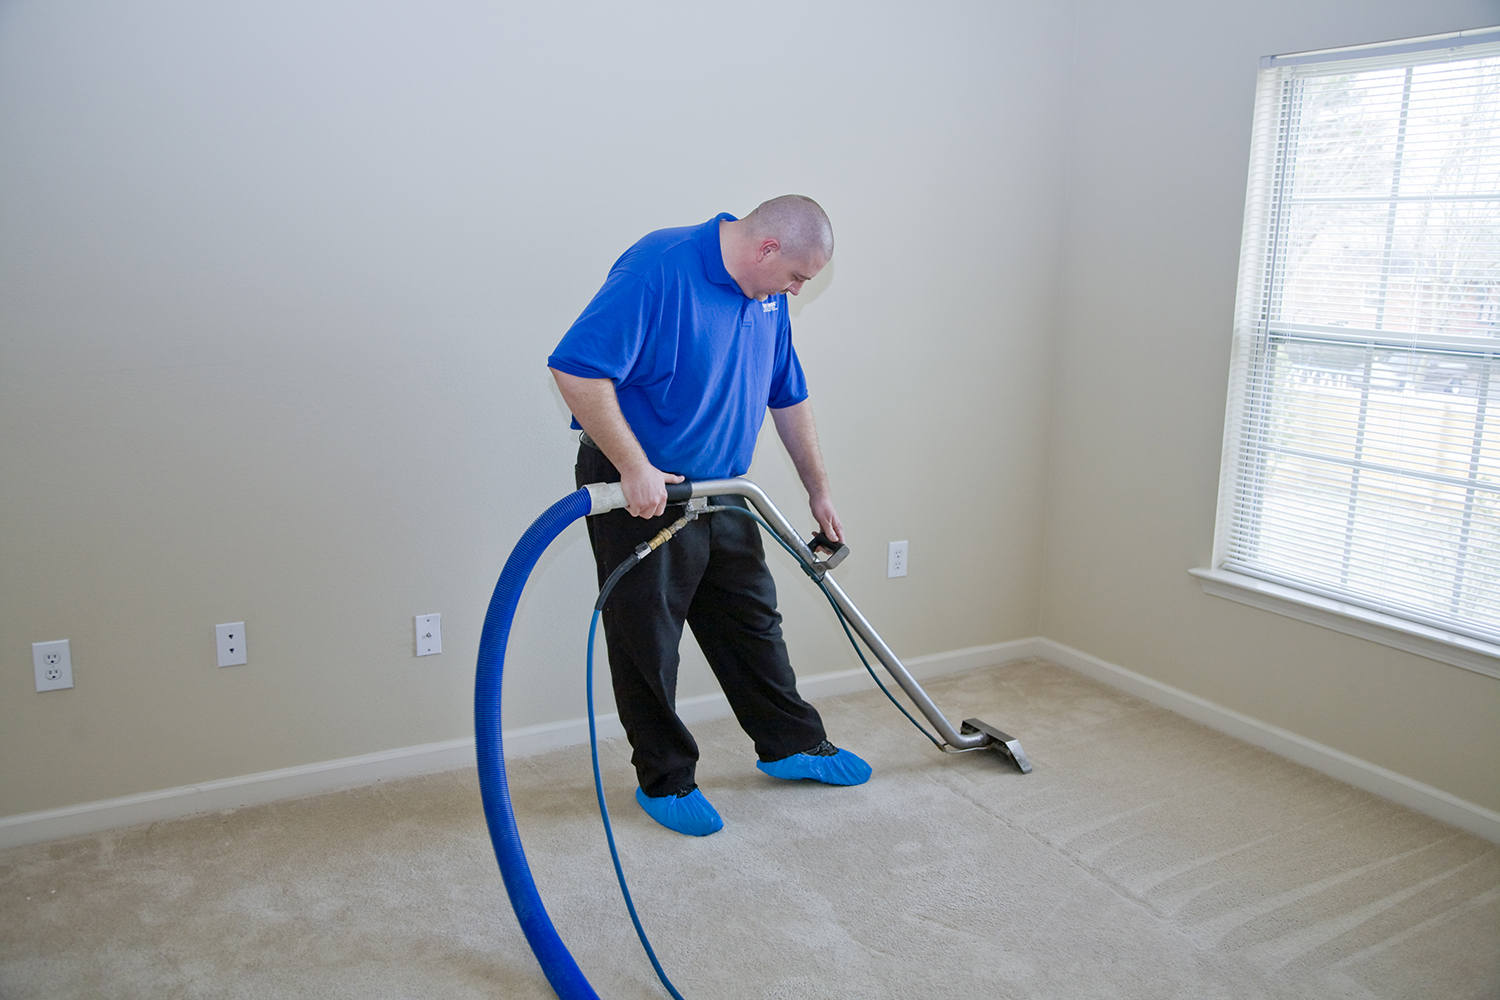 Carpet Cleaning Services in Dubai